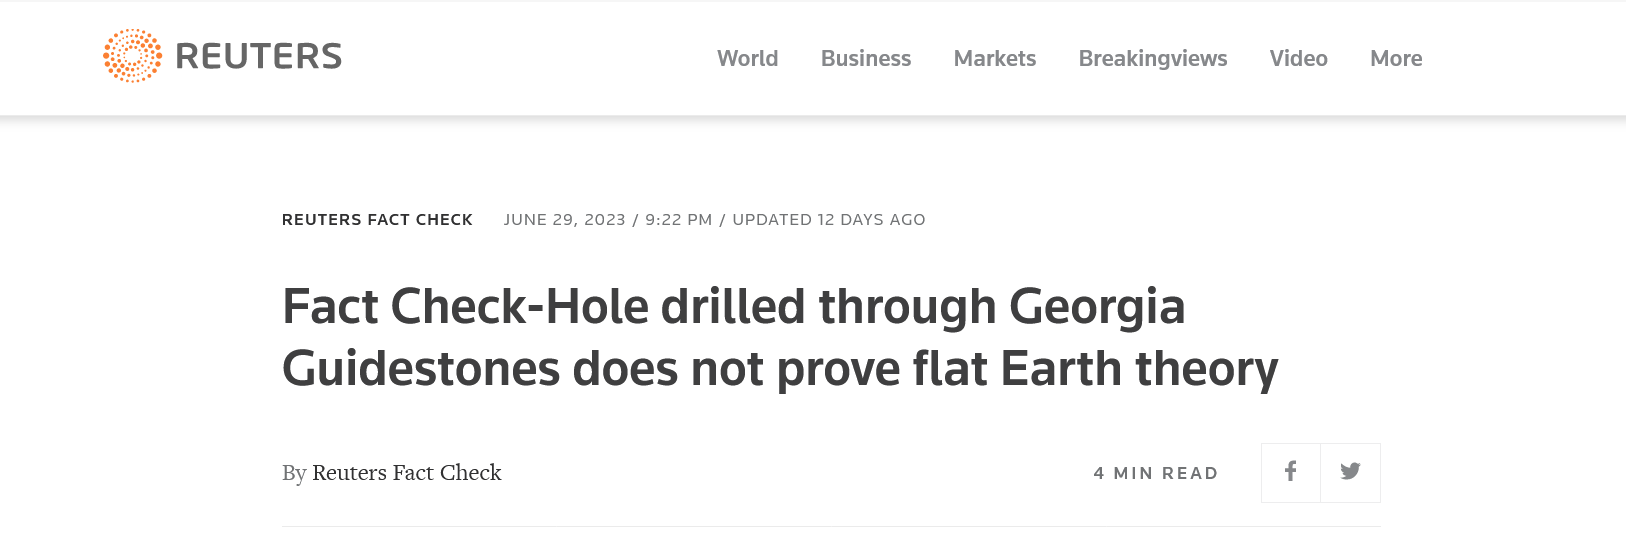 Screenshot 2023 07 11 At 12 33 48 Fact Check Hole Drilled Through Georgia Guidestones Does Not Prove Flat Earth Theory